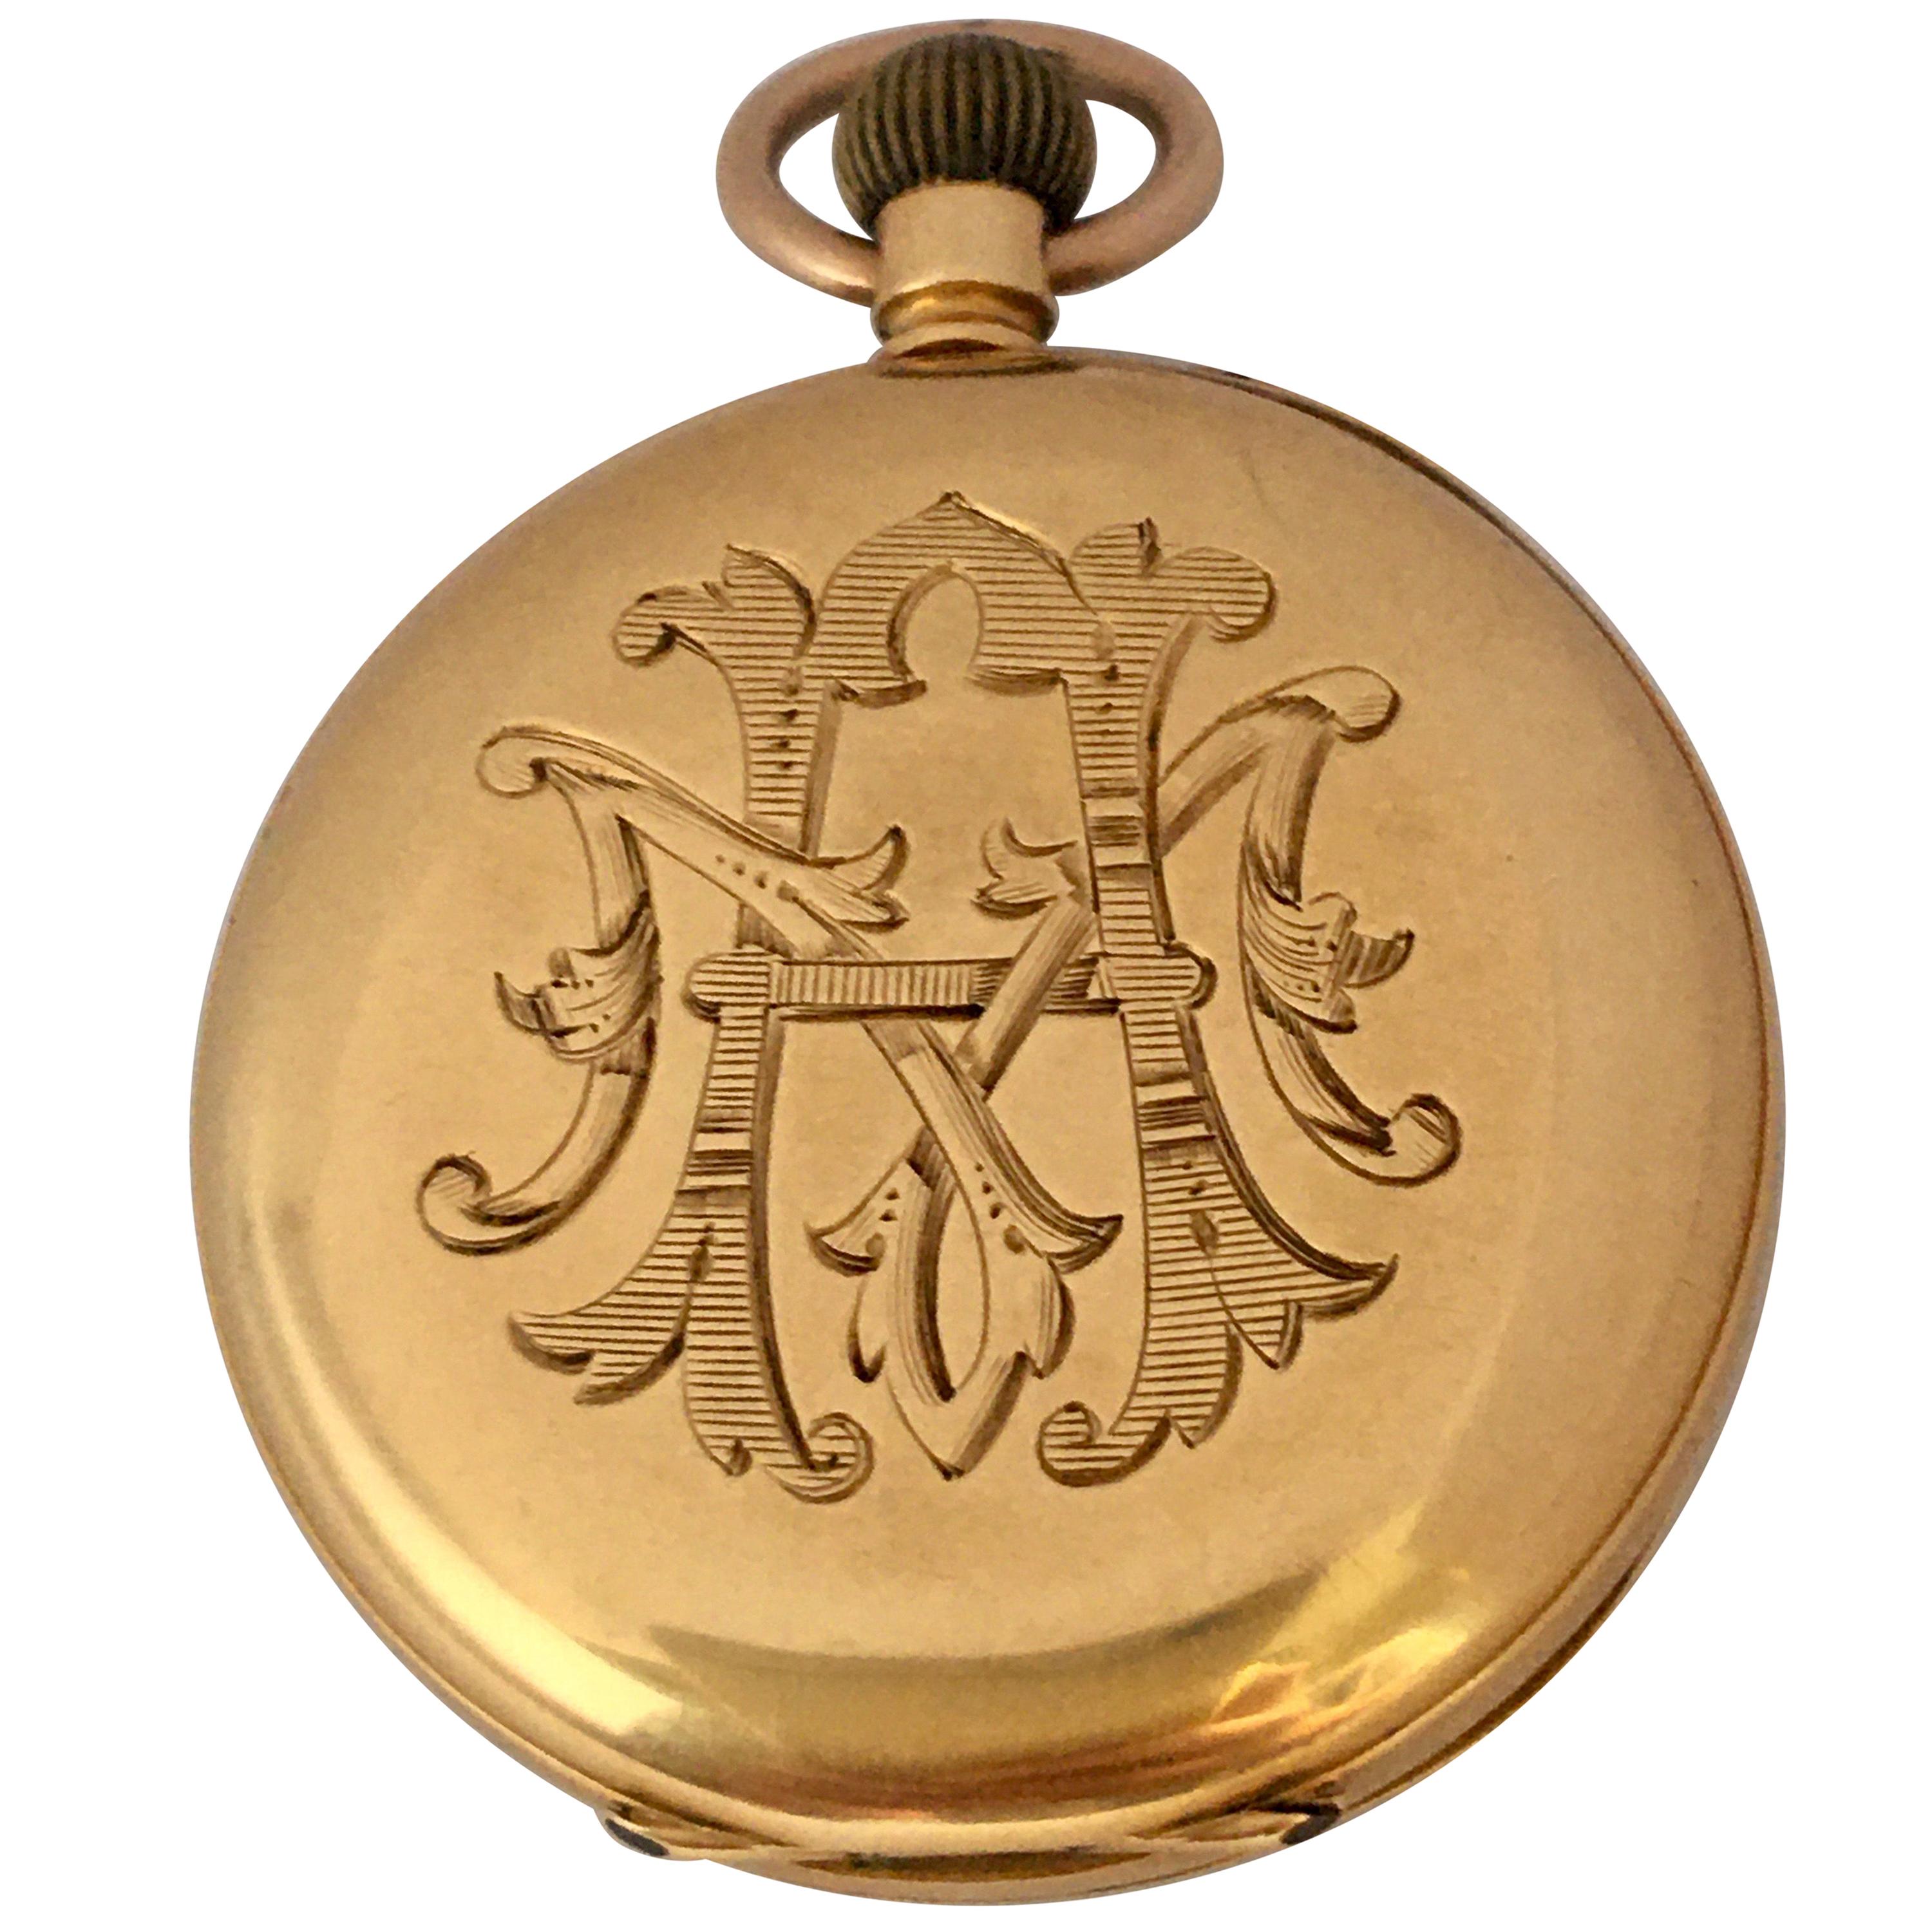 This beautiful small approximately 33mm diameter antique gold hand winding pocket watch is in good working condition and it is running well. Visible signs of ageing and wear with tiny light marks on the glass surface and on the case as shown. The